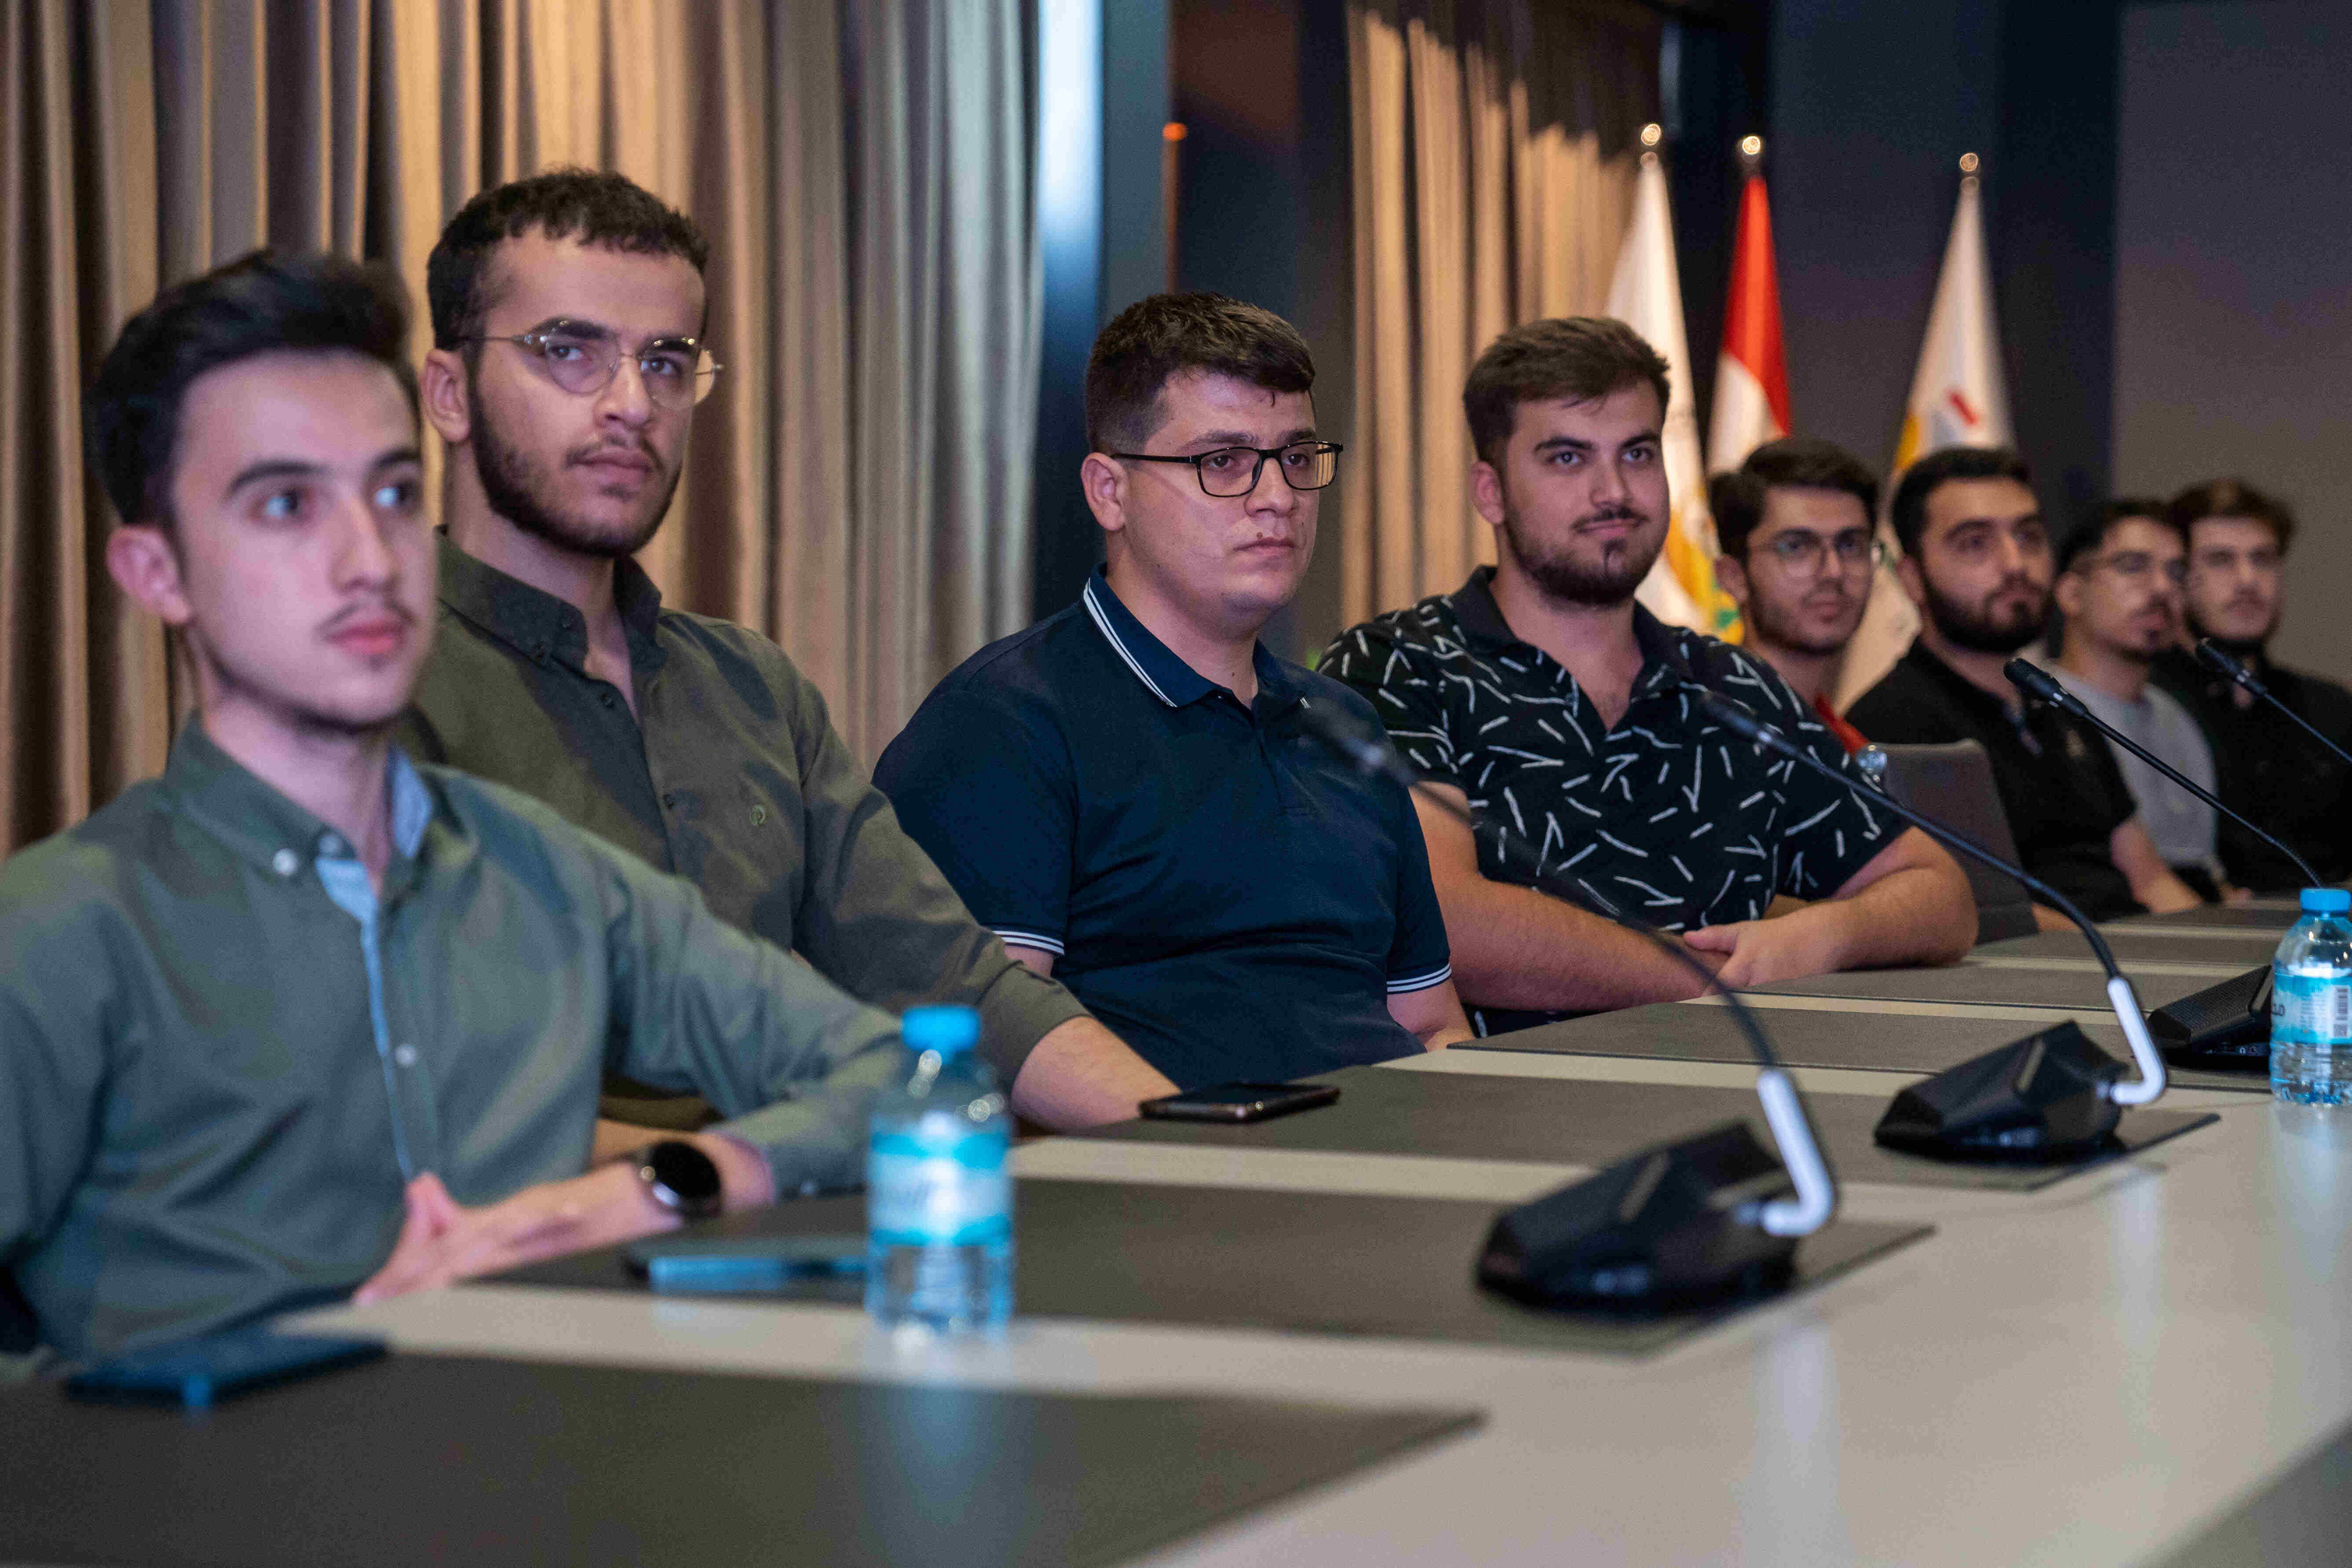 Computer Engineering Students Gain Real-World Insights on KRG-DIT Trip